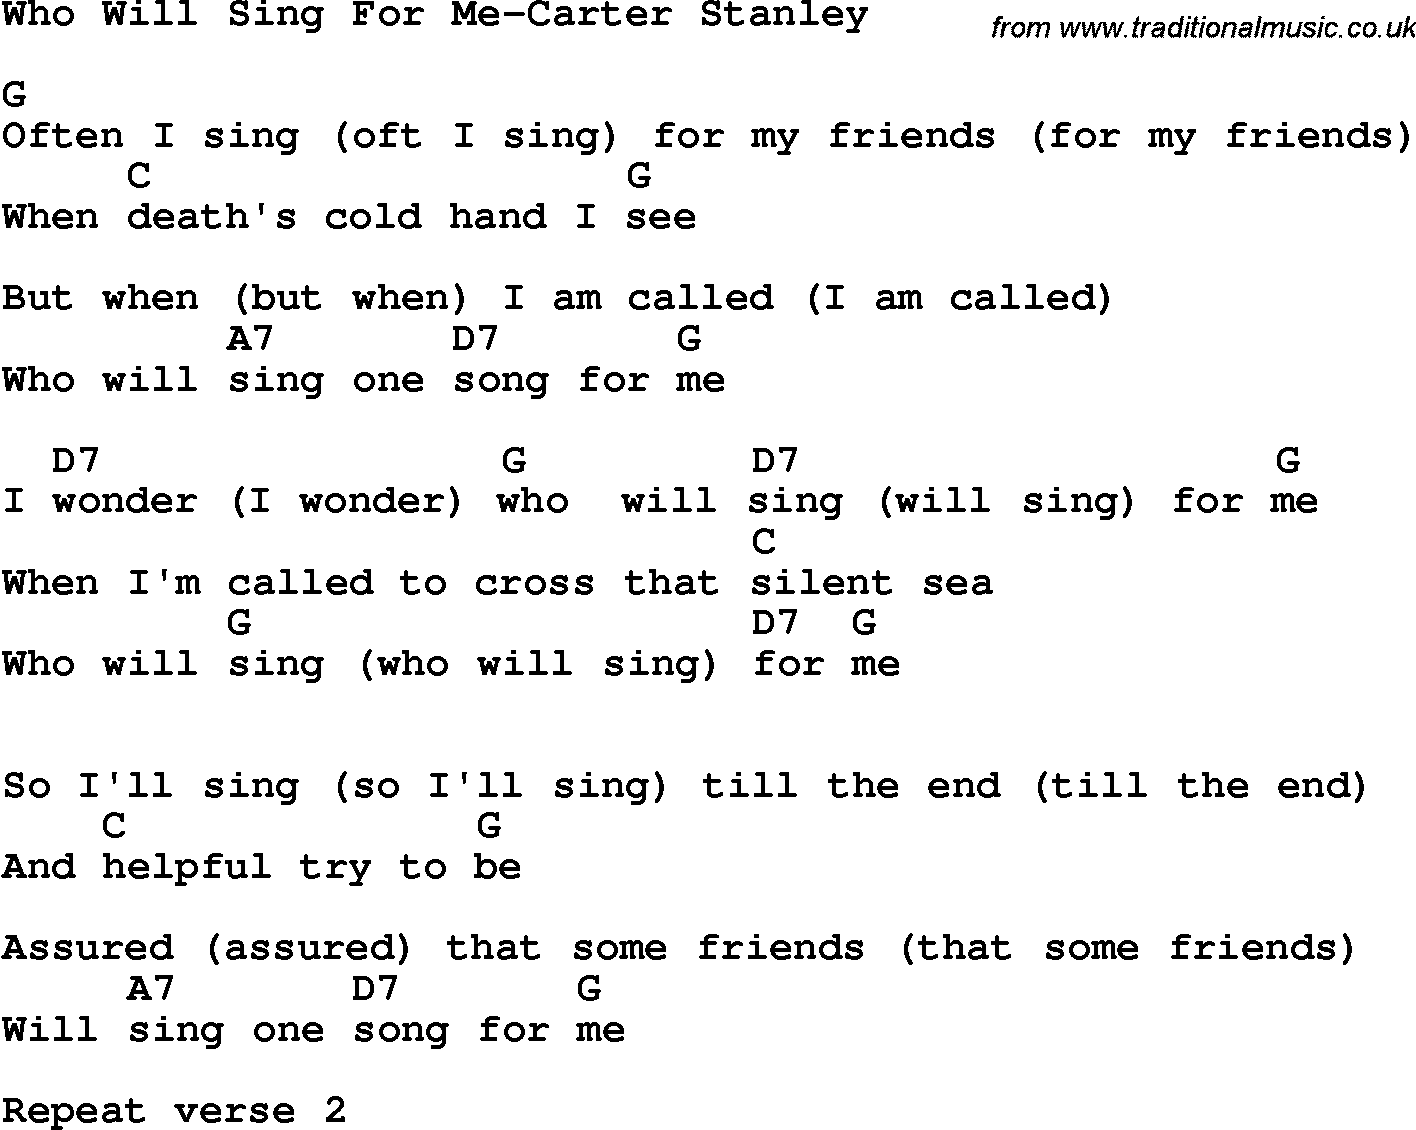 Country, Southern and Bluegrass Gospel Song Who Will Sing For Me-Carter Stanley lyrics and chords